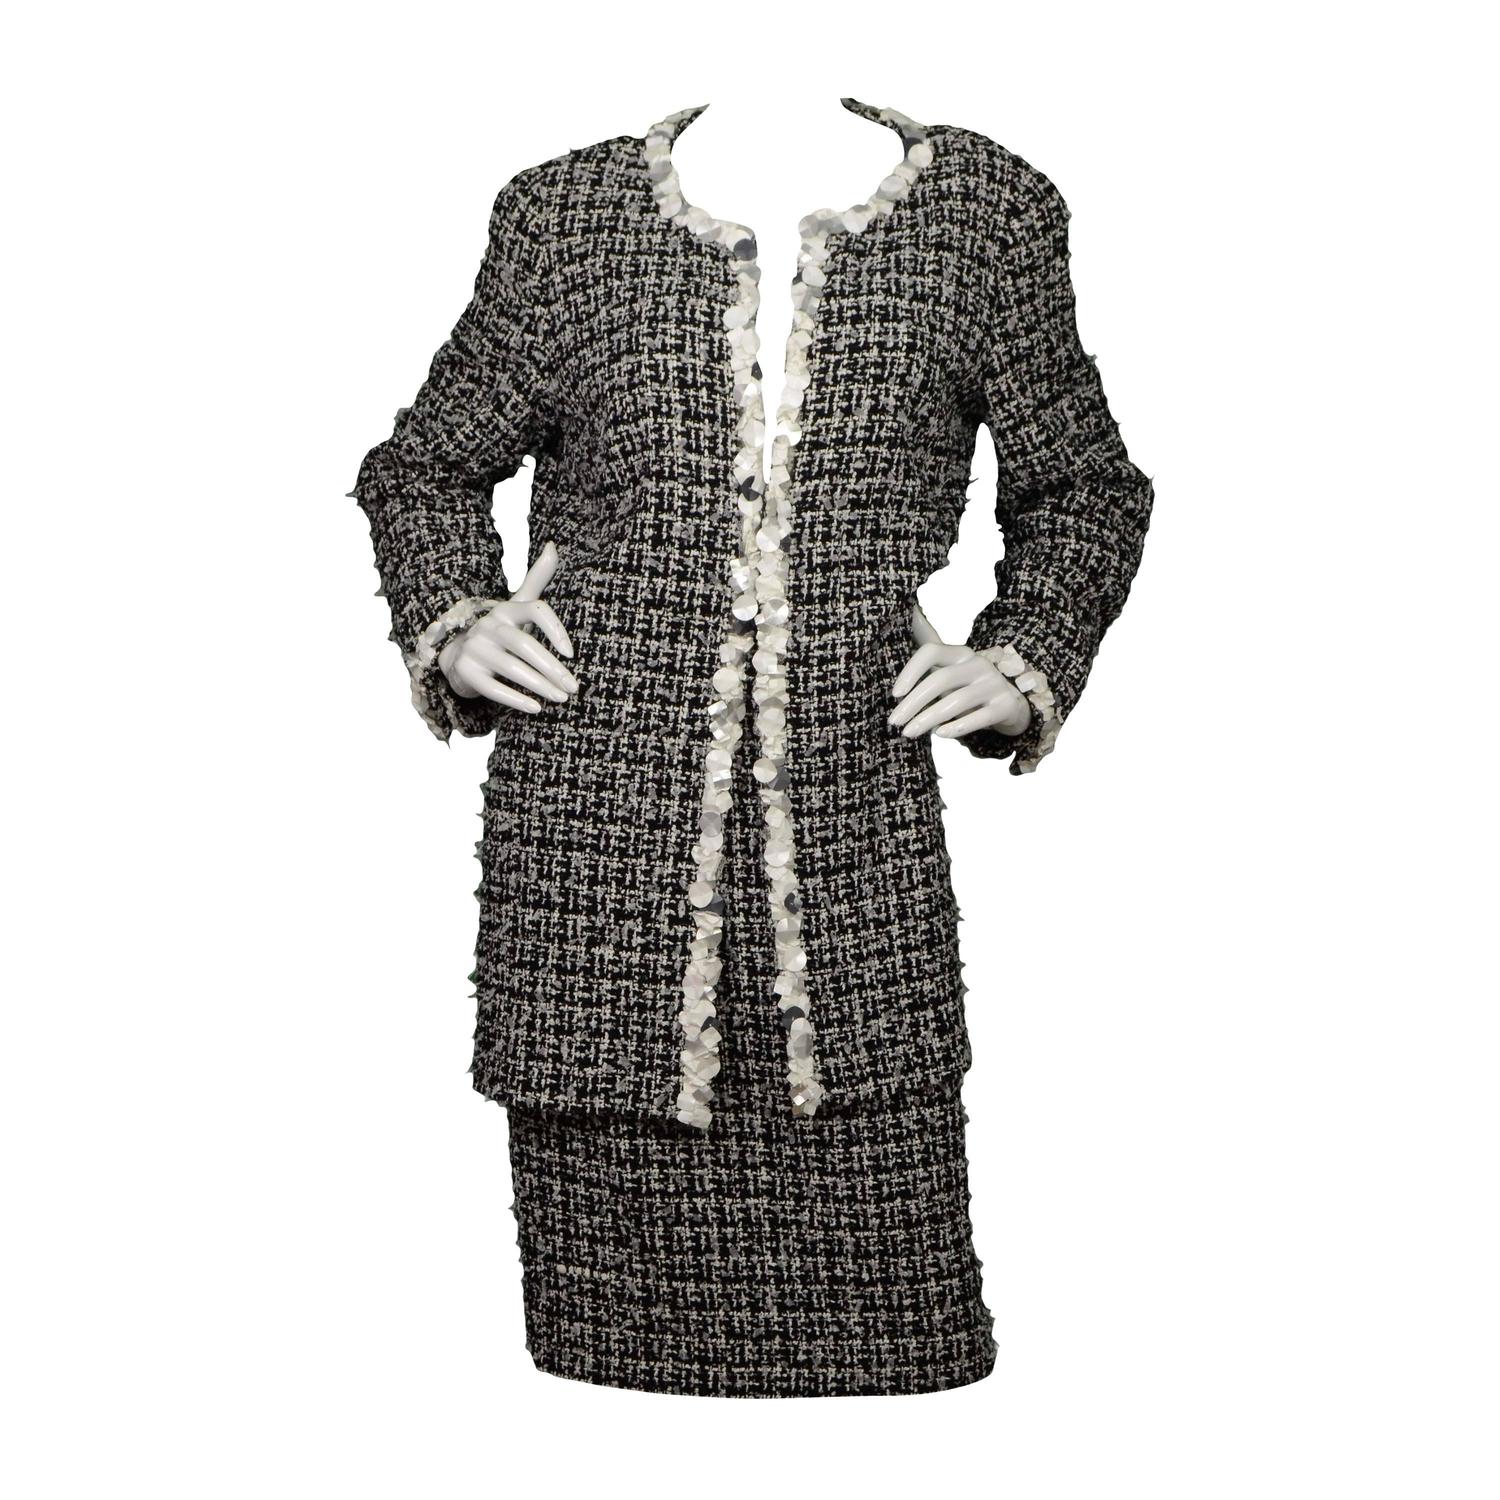 Chanel Black and White Tweed Skirt Suit sz 48 For Sale at 1stdibs